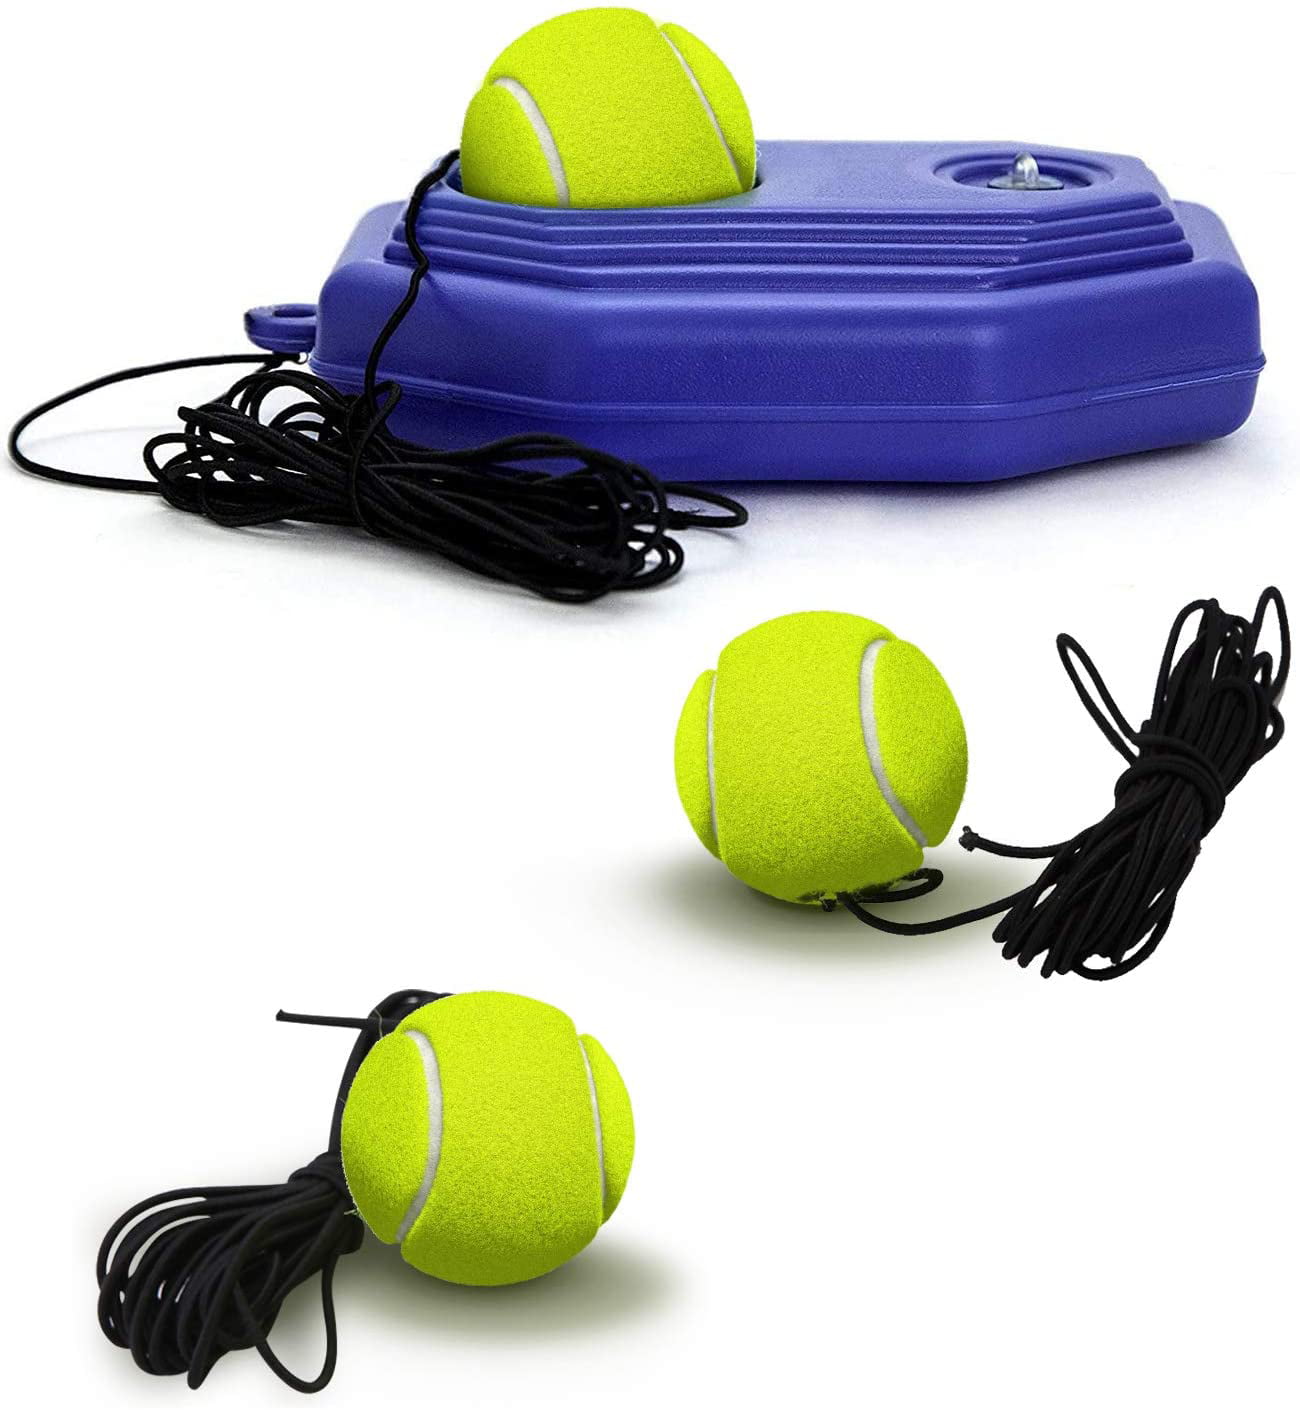 Suitable for Beginners Sport Exercise Solo Tennis Training Equipment for Self-Pracitce Portable Tennis Training Tool Tennis Trainer Rebound Ball Including 2 String Balls Tennis Rebounder Kit 